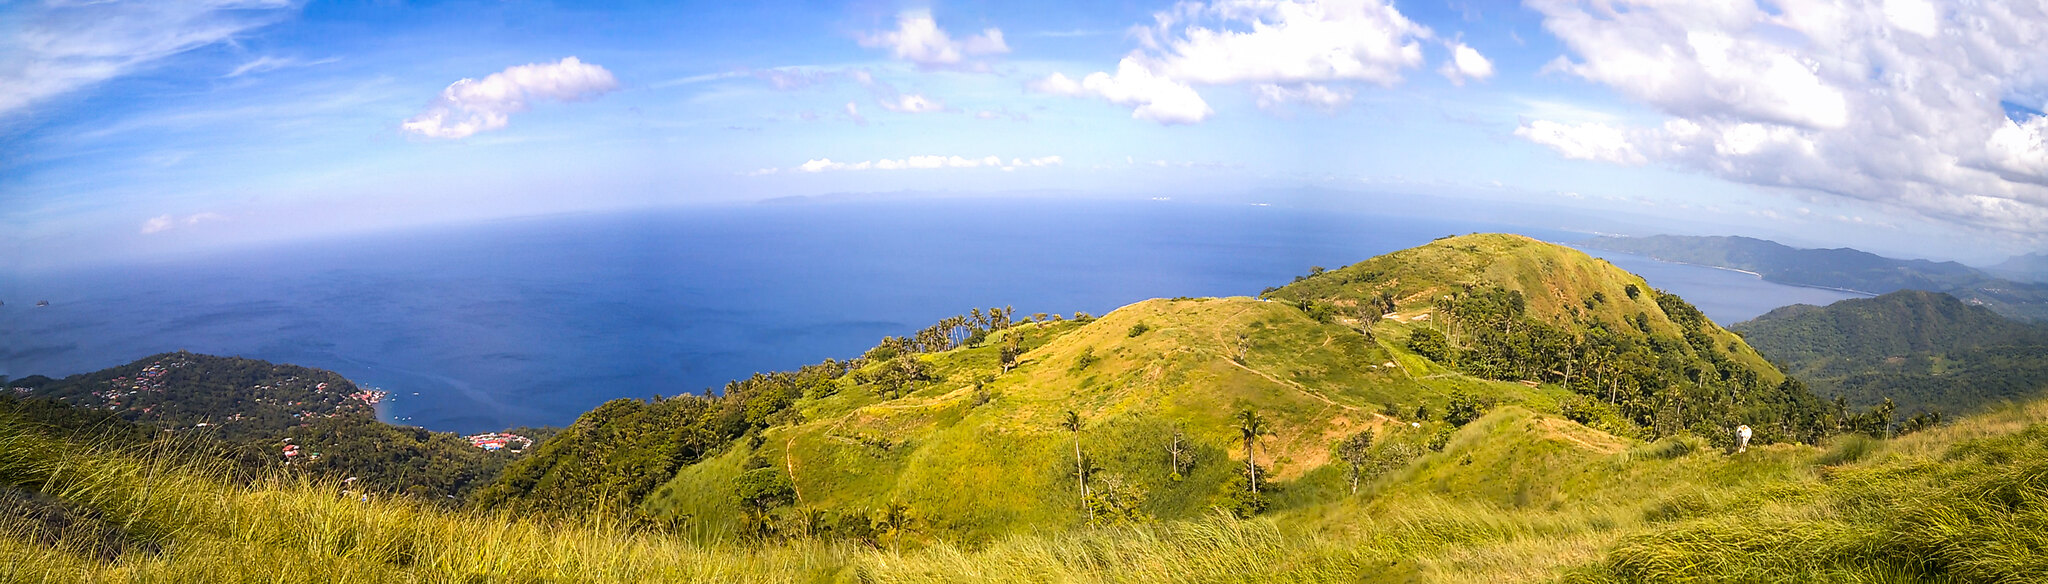 Travel Guide to Mabini, Batangas, Philippines (Mt. Gulugod Baboy & more)